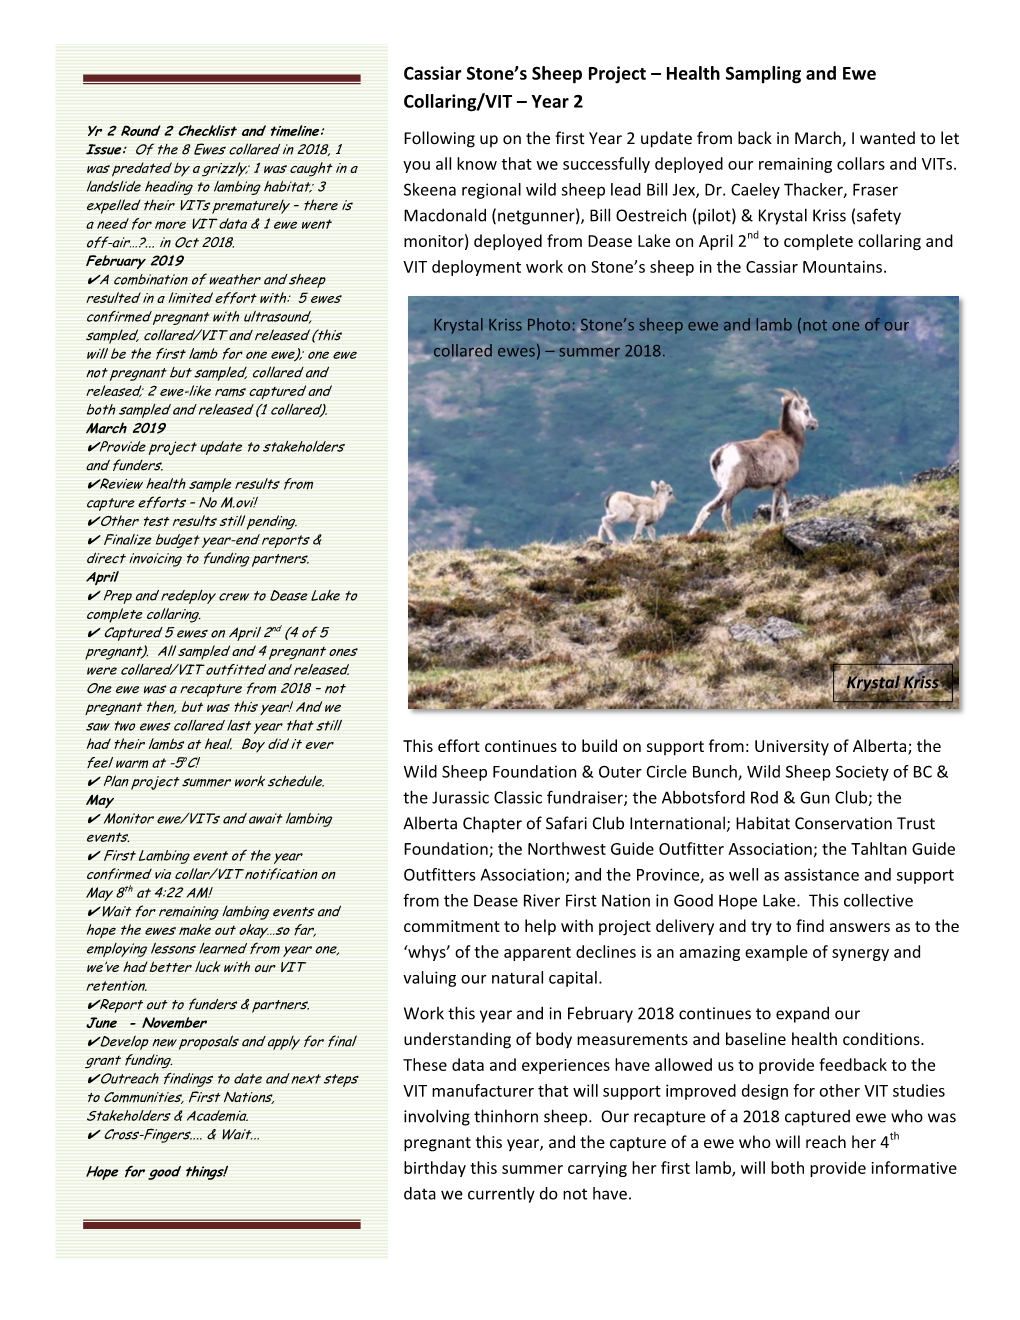 Cassiar Stone's Sheep Project – Health Sampling and Ewe Collaring